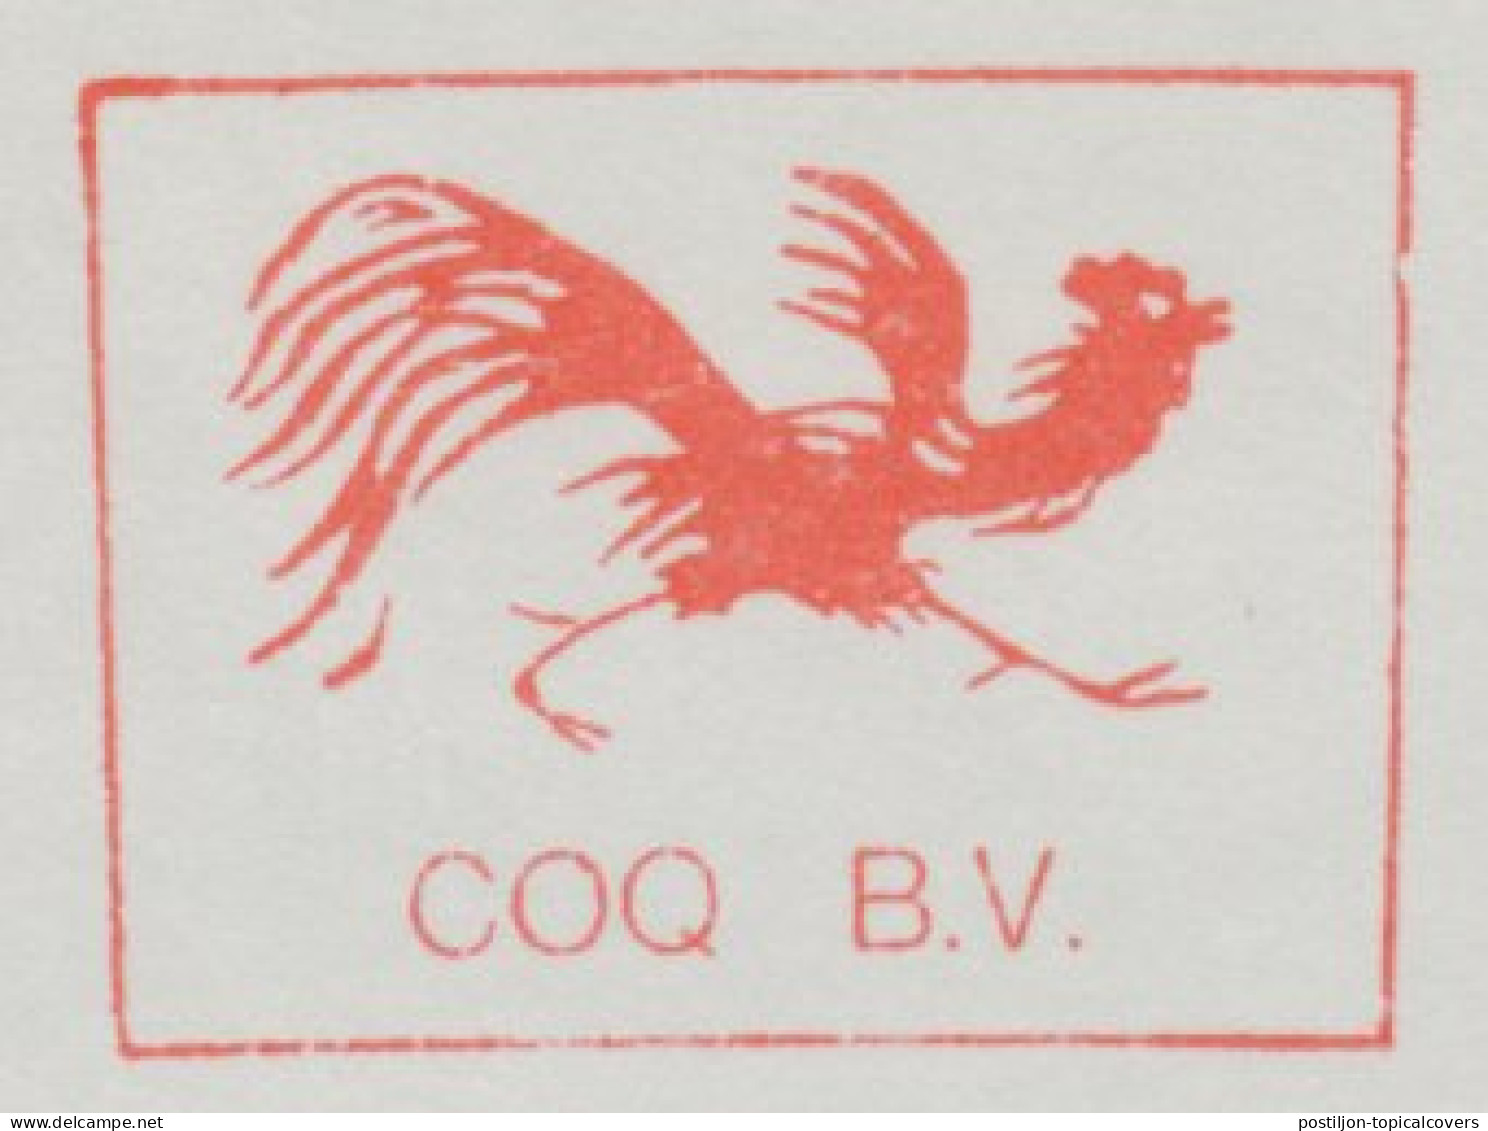 Meter Cut Netherlands 1978 Cock - Rooster - Farm